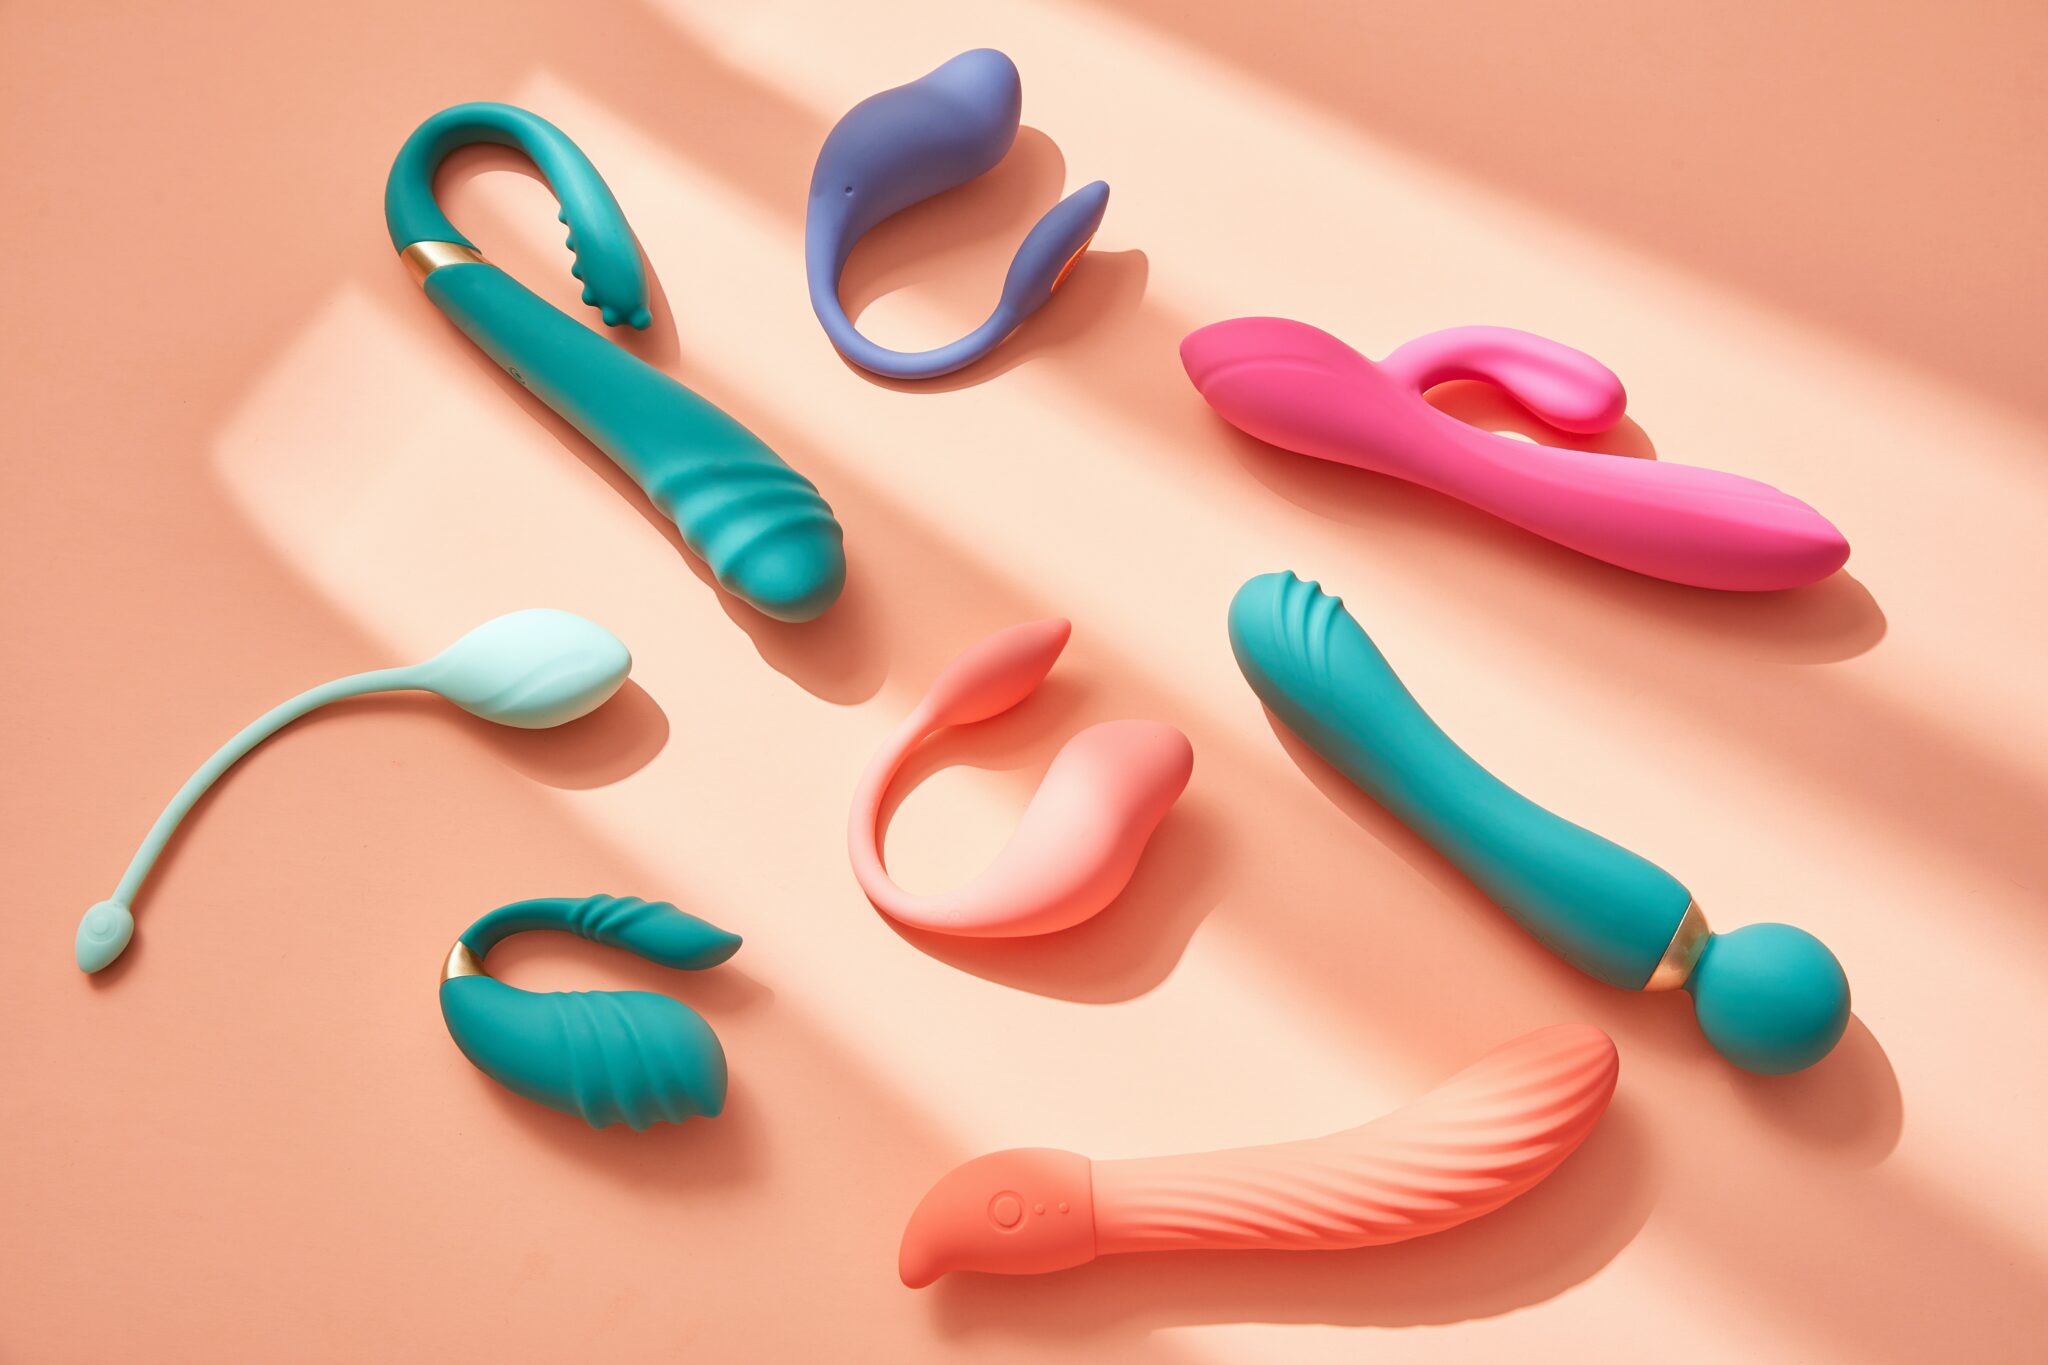 A collection of sex toy vibrators in a colorful array over an orange background.